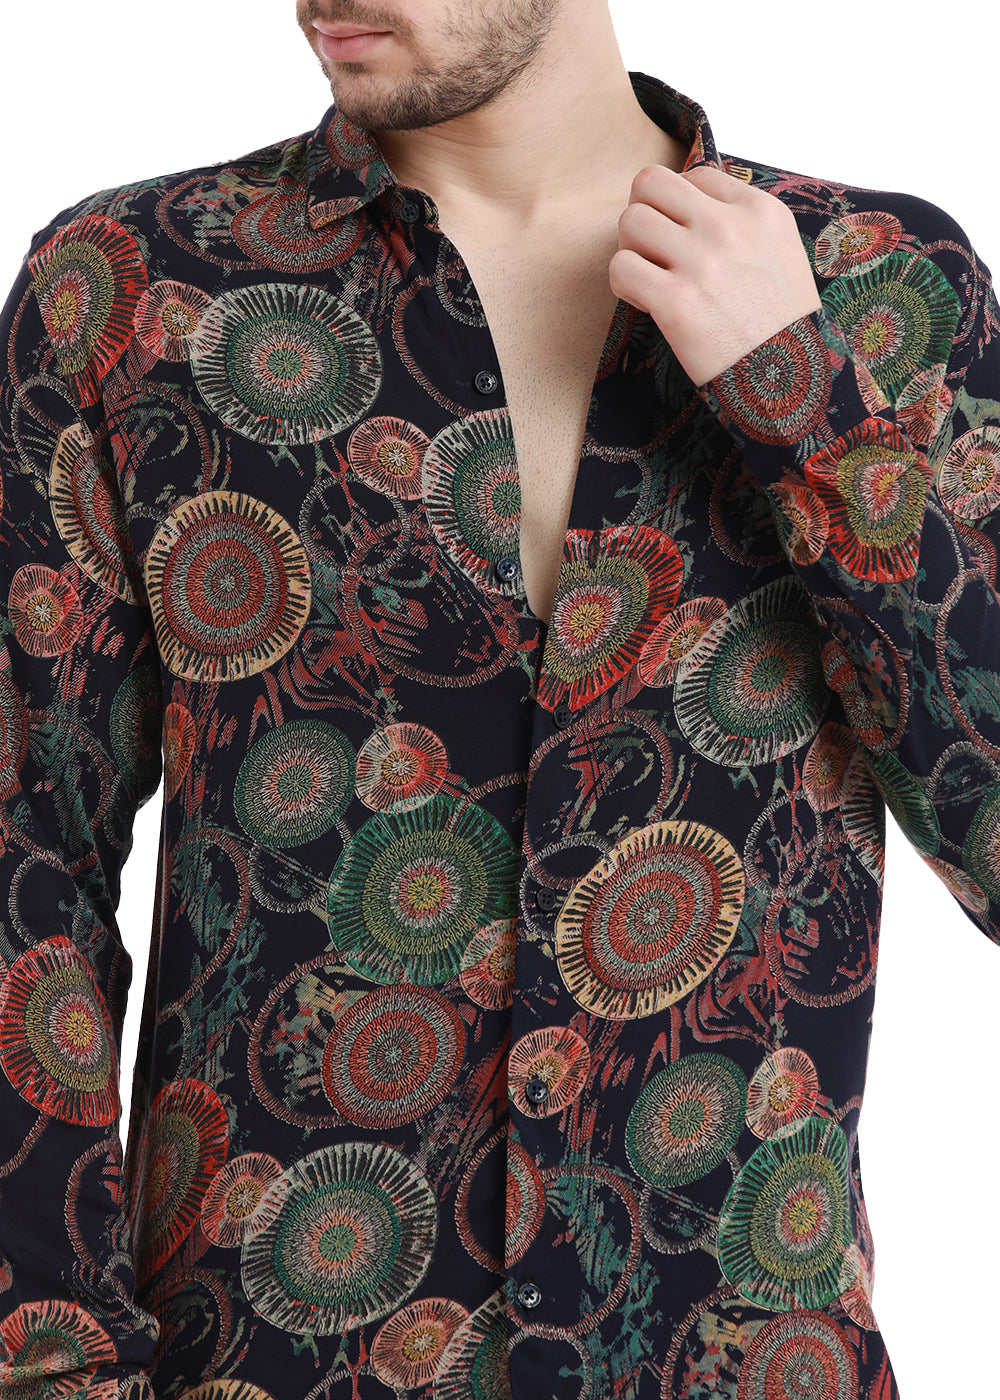 Concentric Green Print Feather Shirt